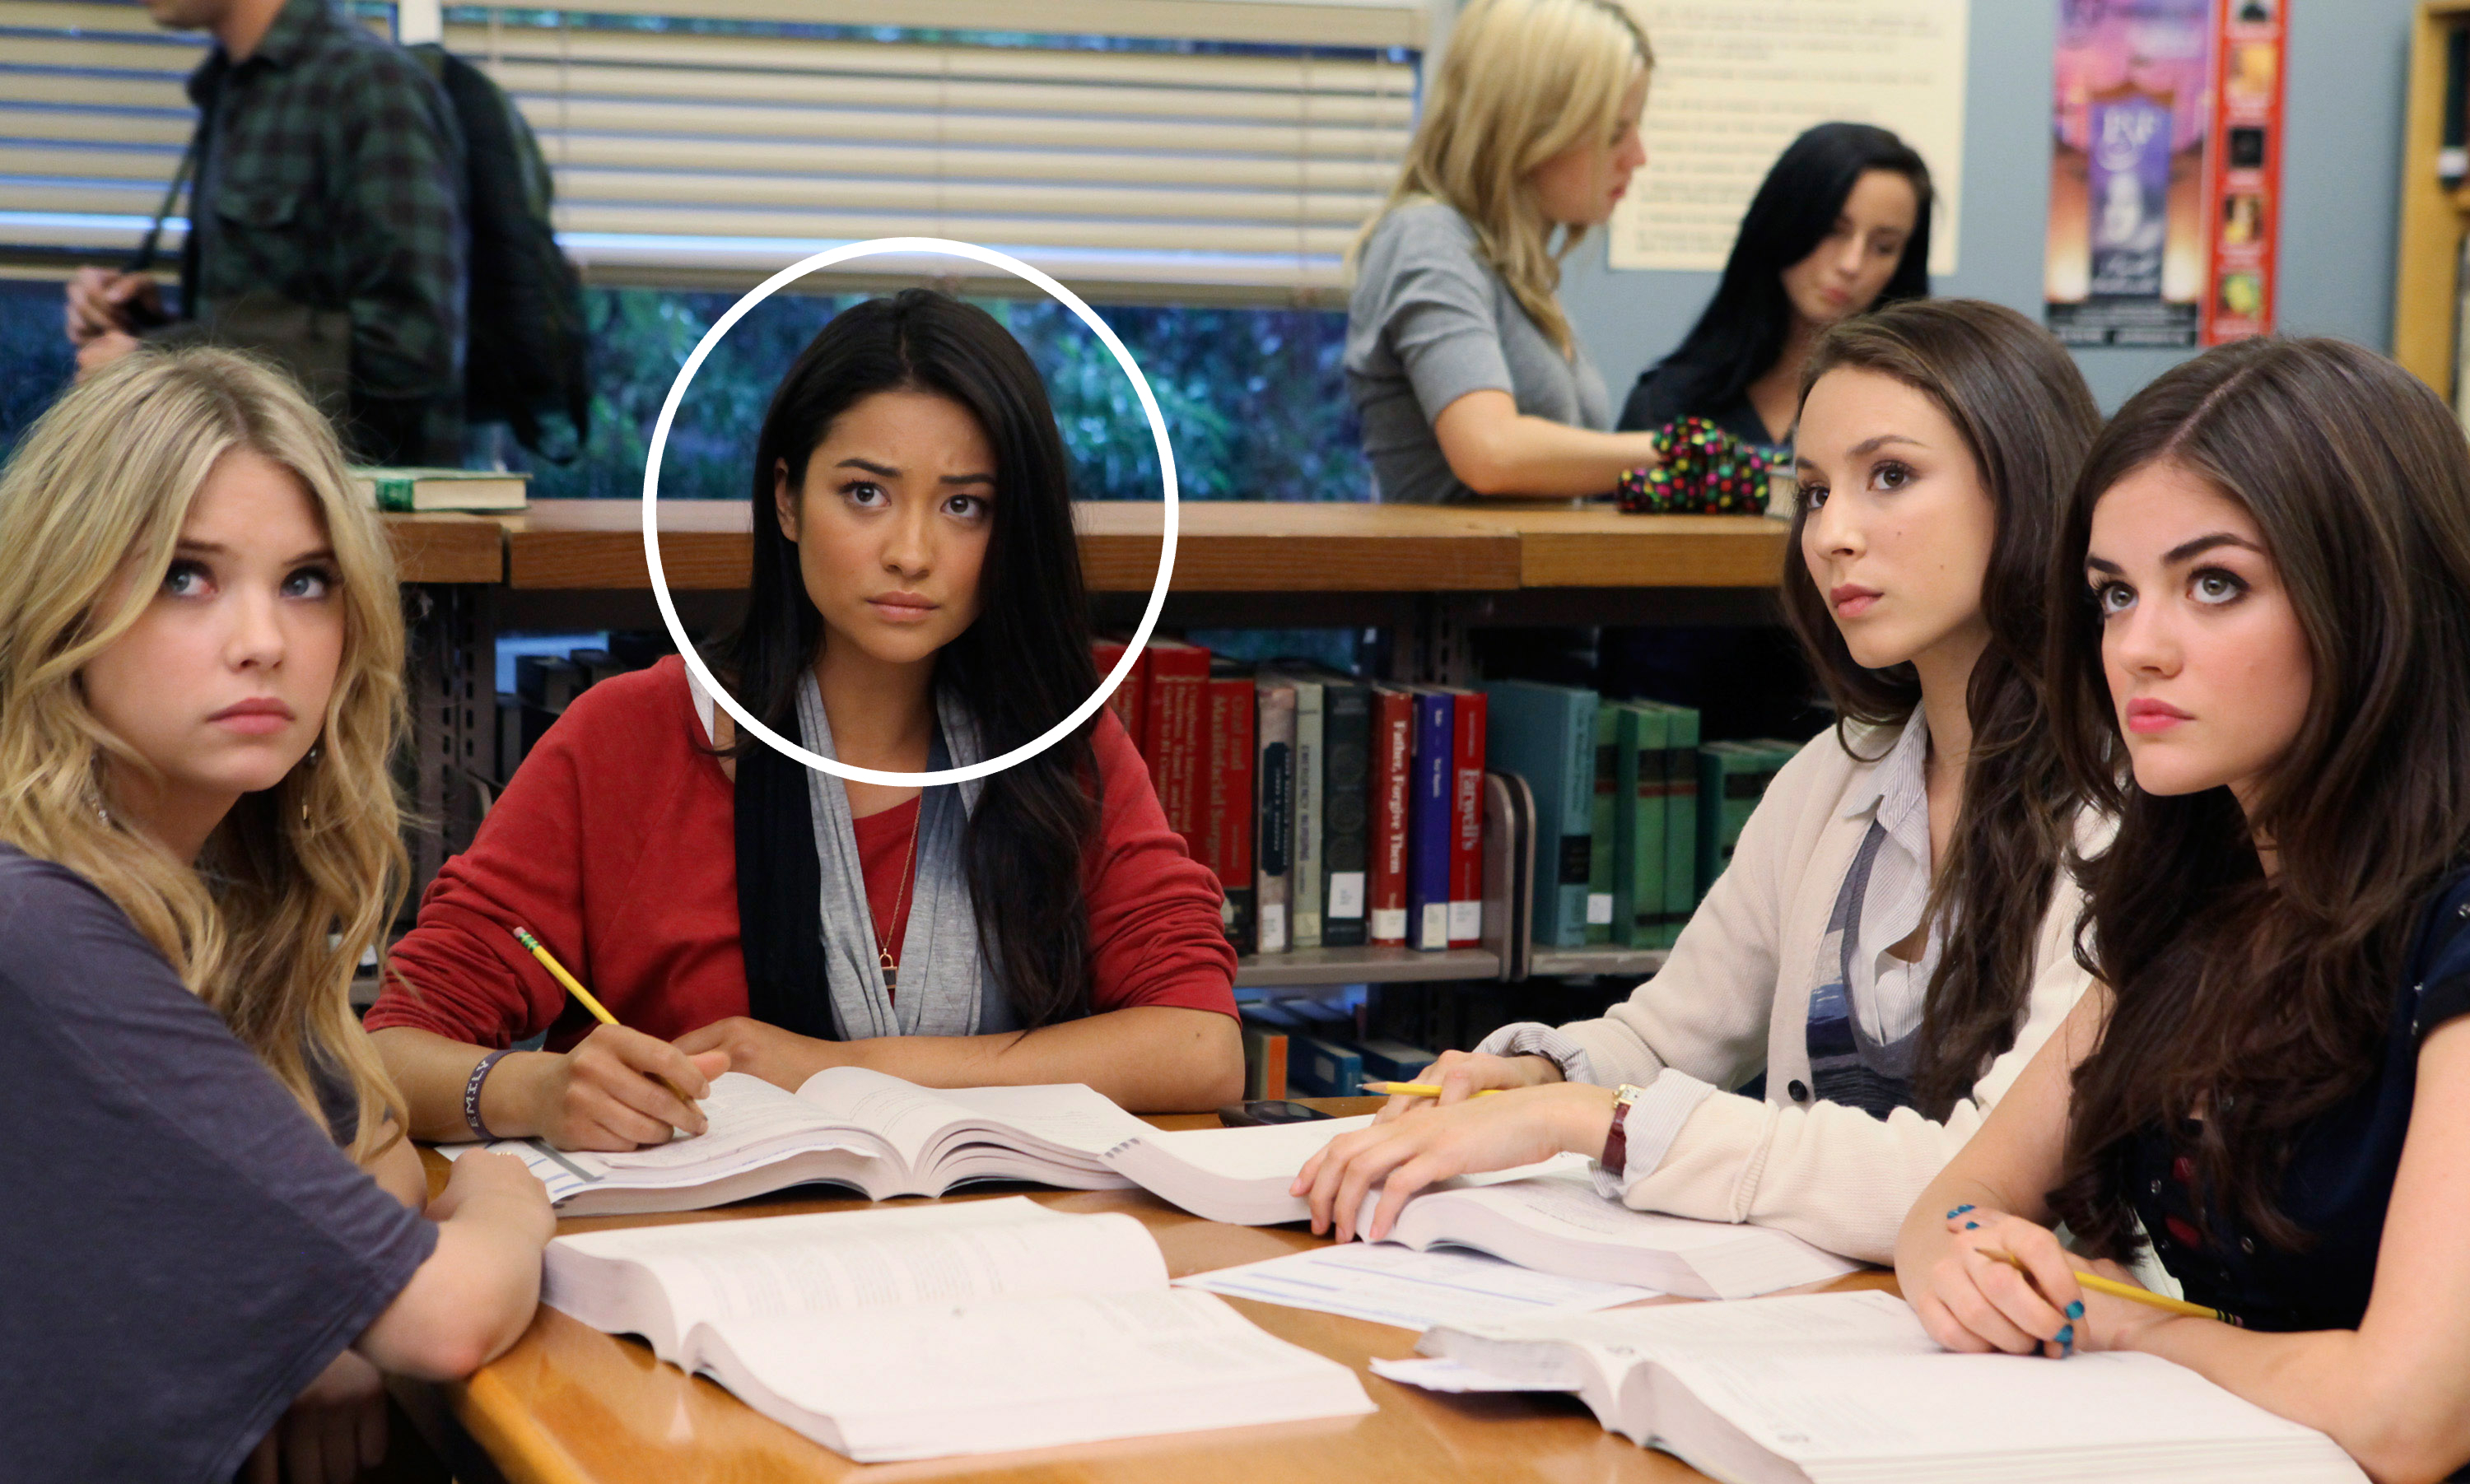 Ashley Benson, Shay Mitchell, Troian Bellisario and Lucy Hale from &quot;Pretty Little Liars&quot; sitting at a library table with books open, looking serious